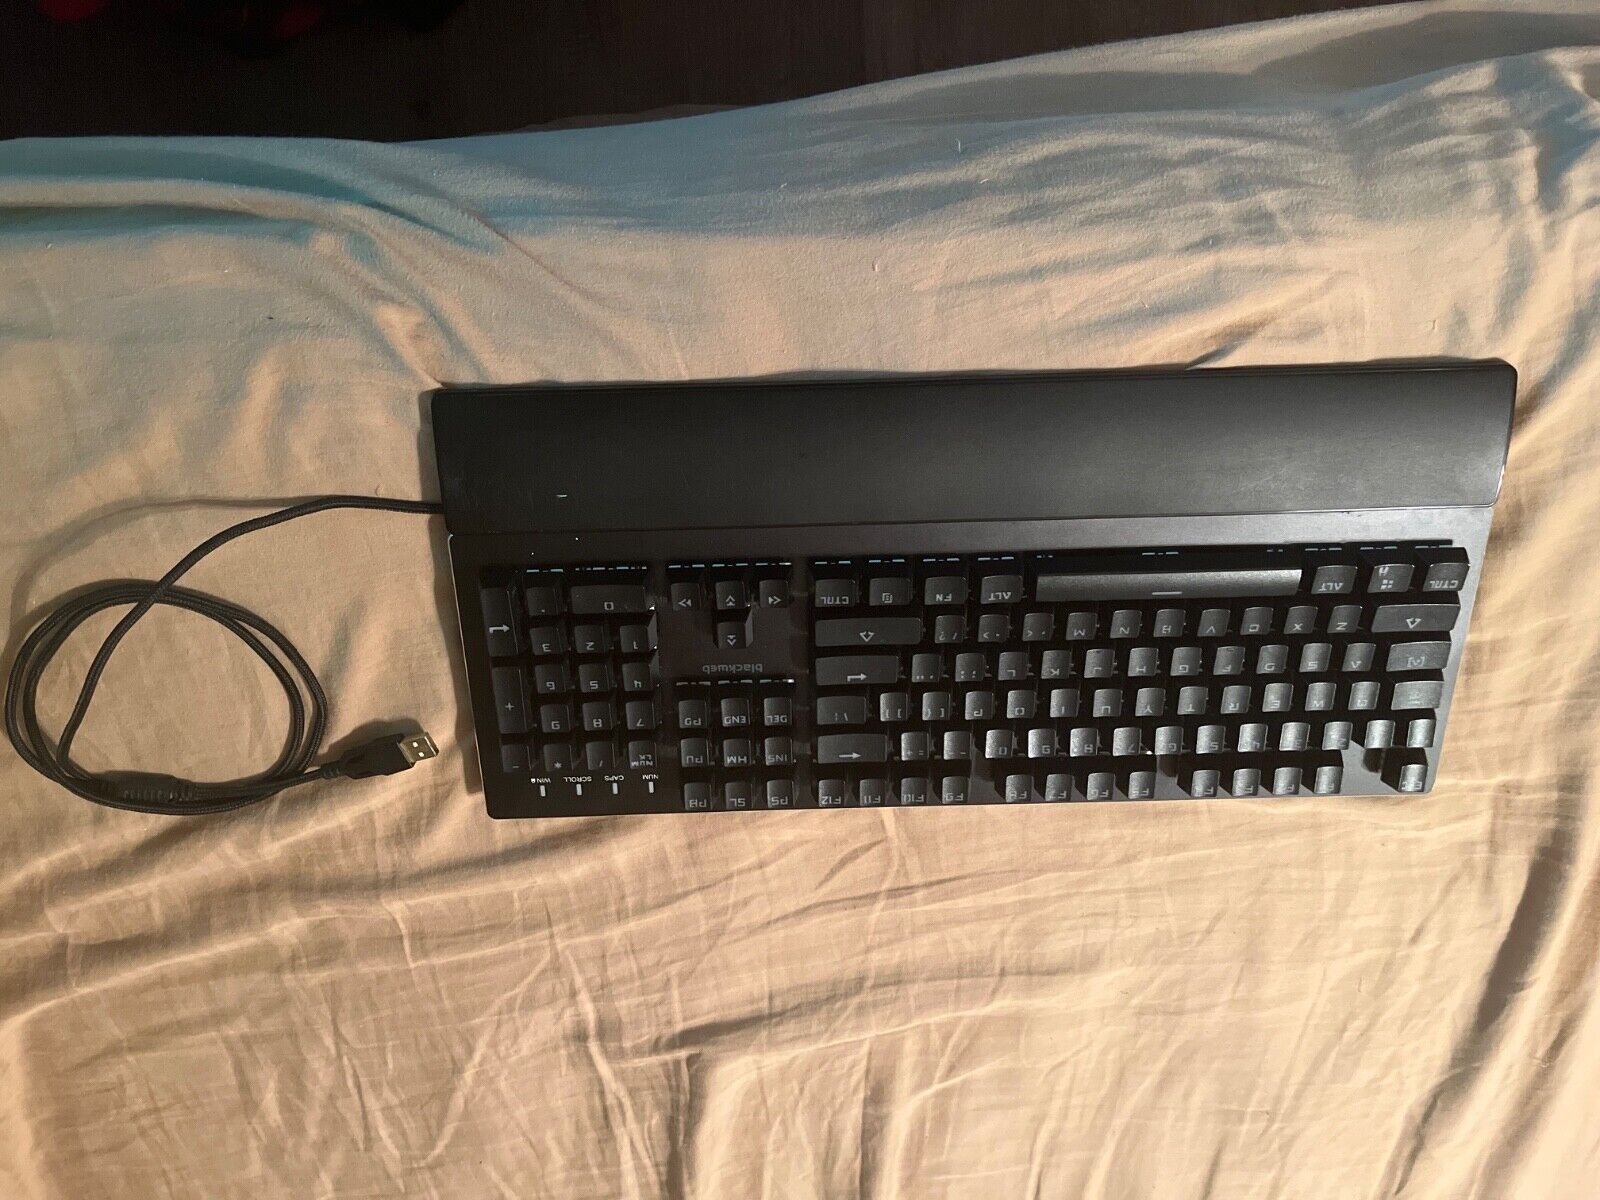 Selling a keyboard for $30, it is used but in the best condition. Originally $50